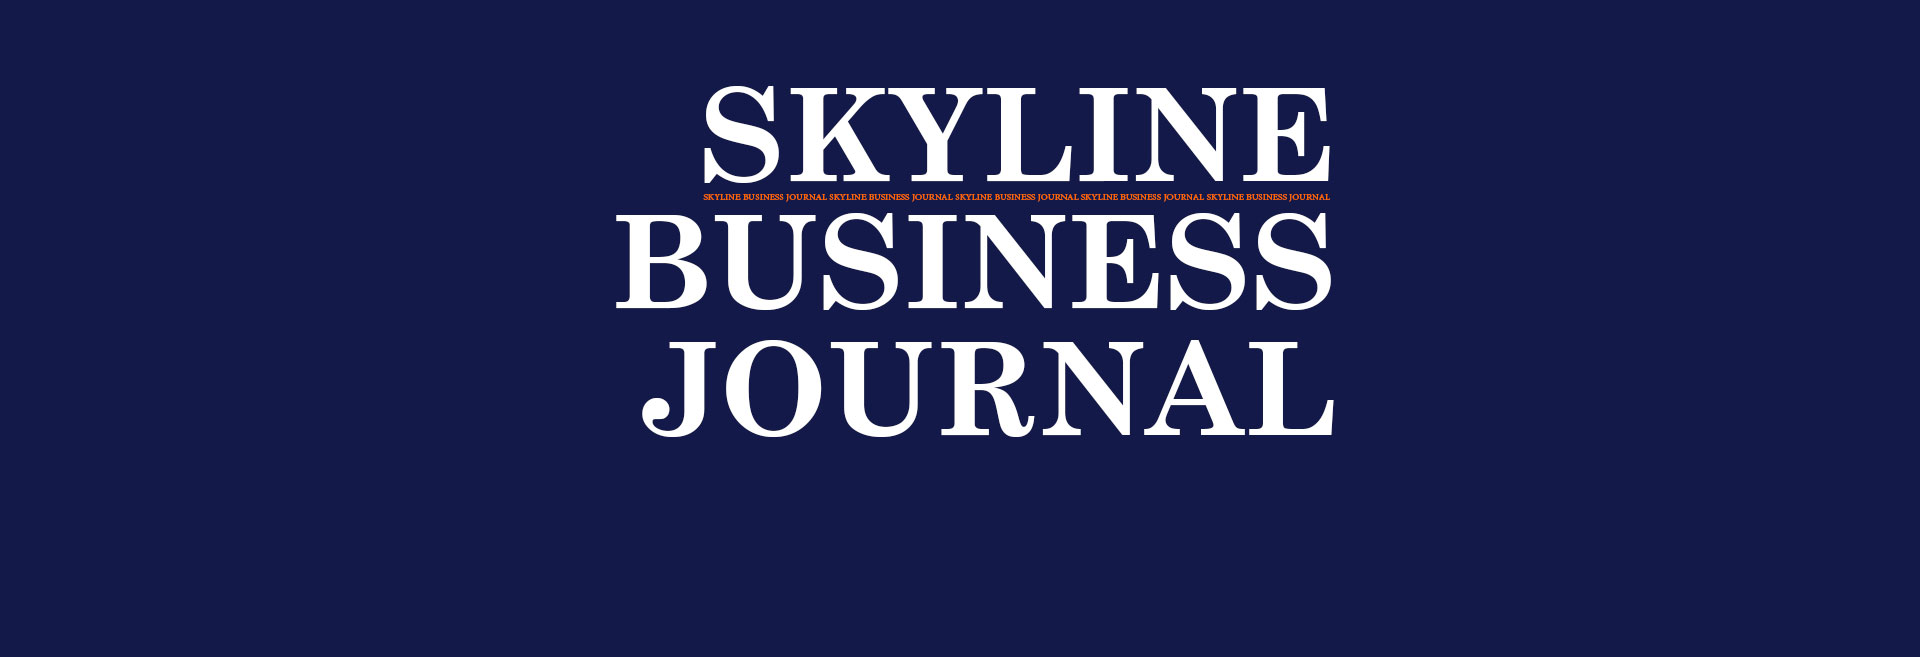 About Skyline Business Journal